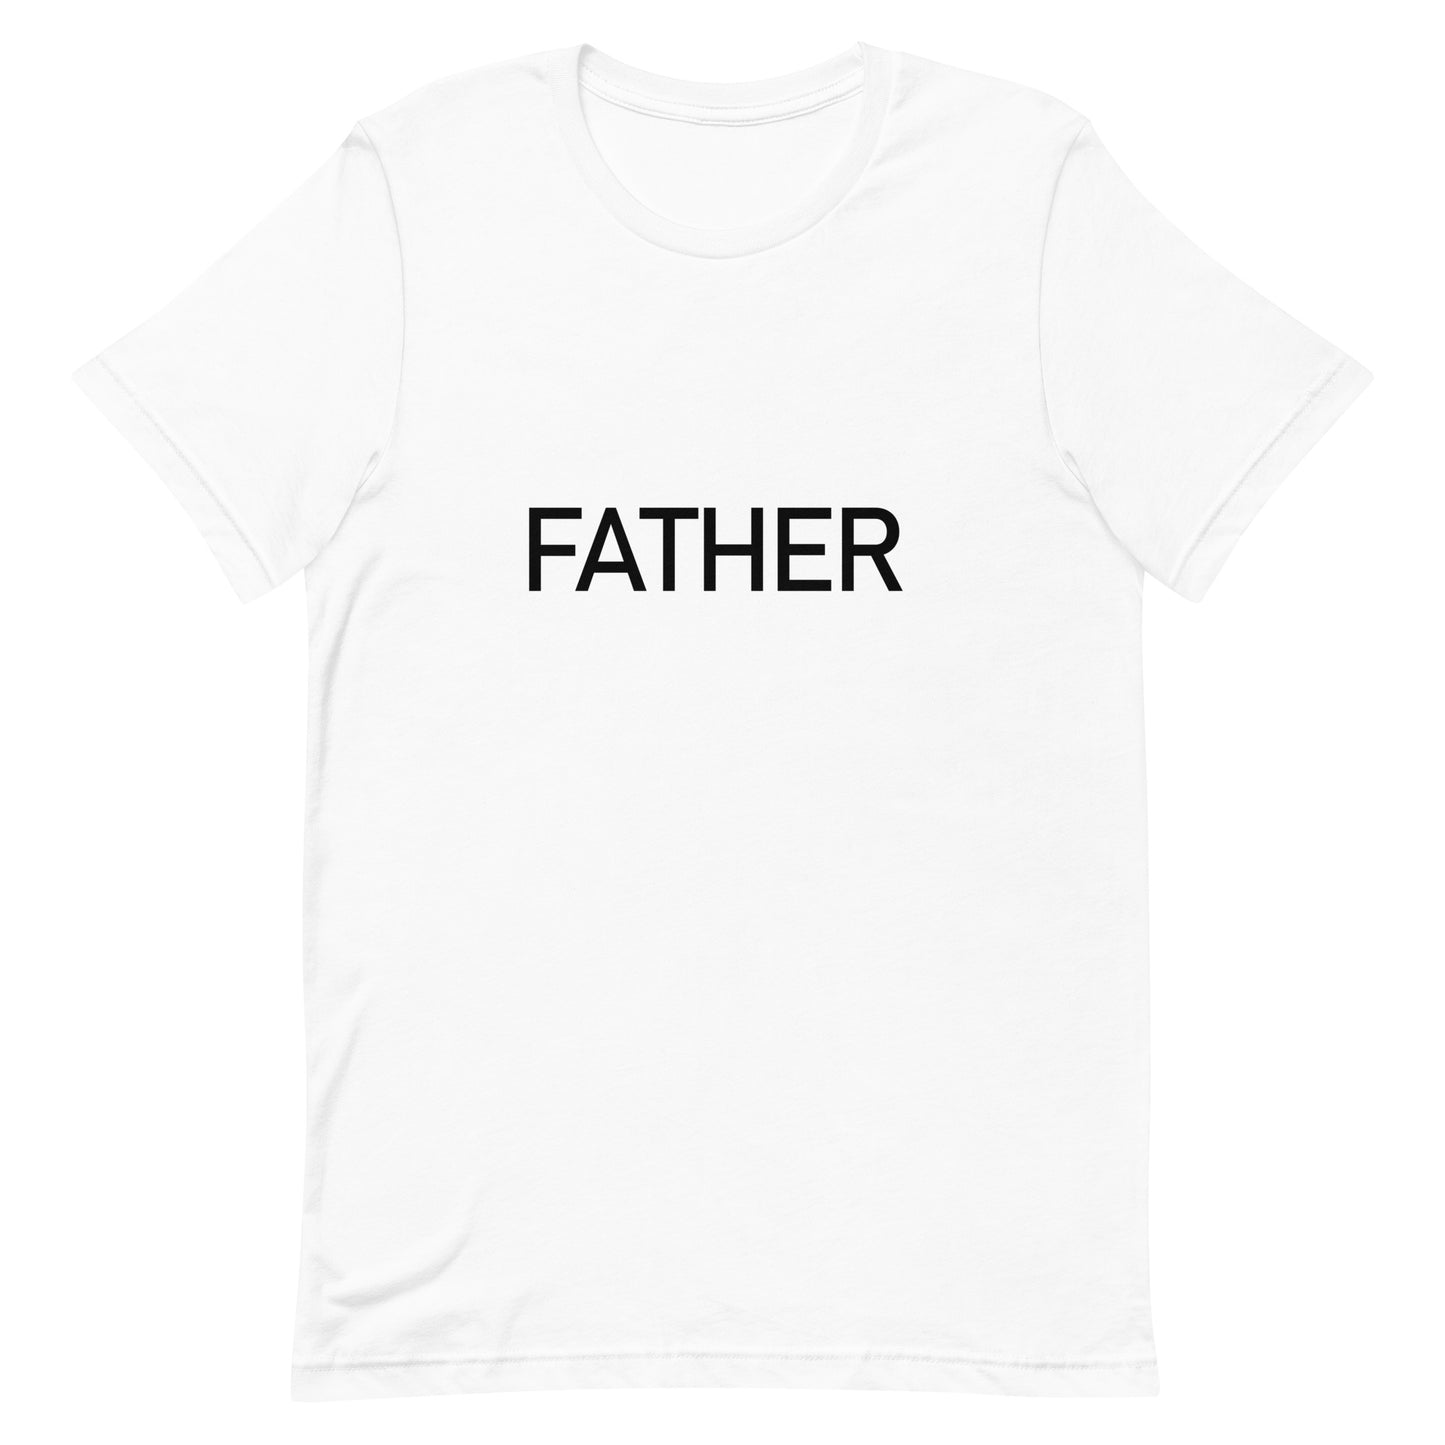 Father Black - Sustainably Made Men’s Short Sleeve Tee